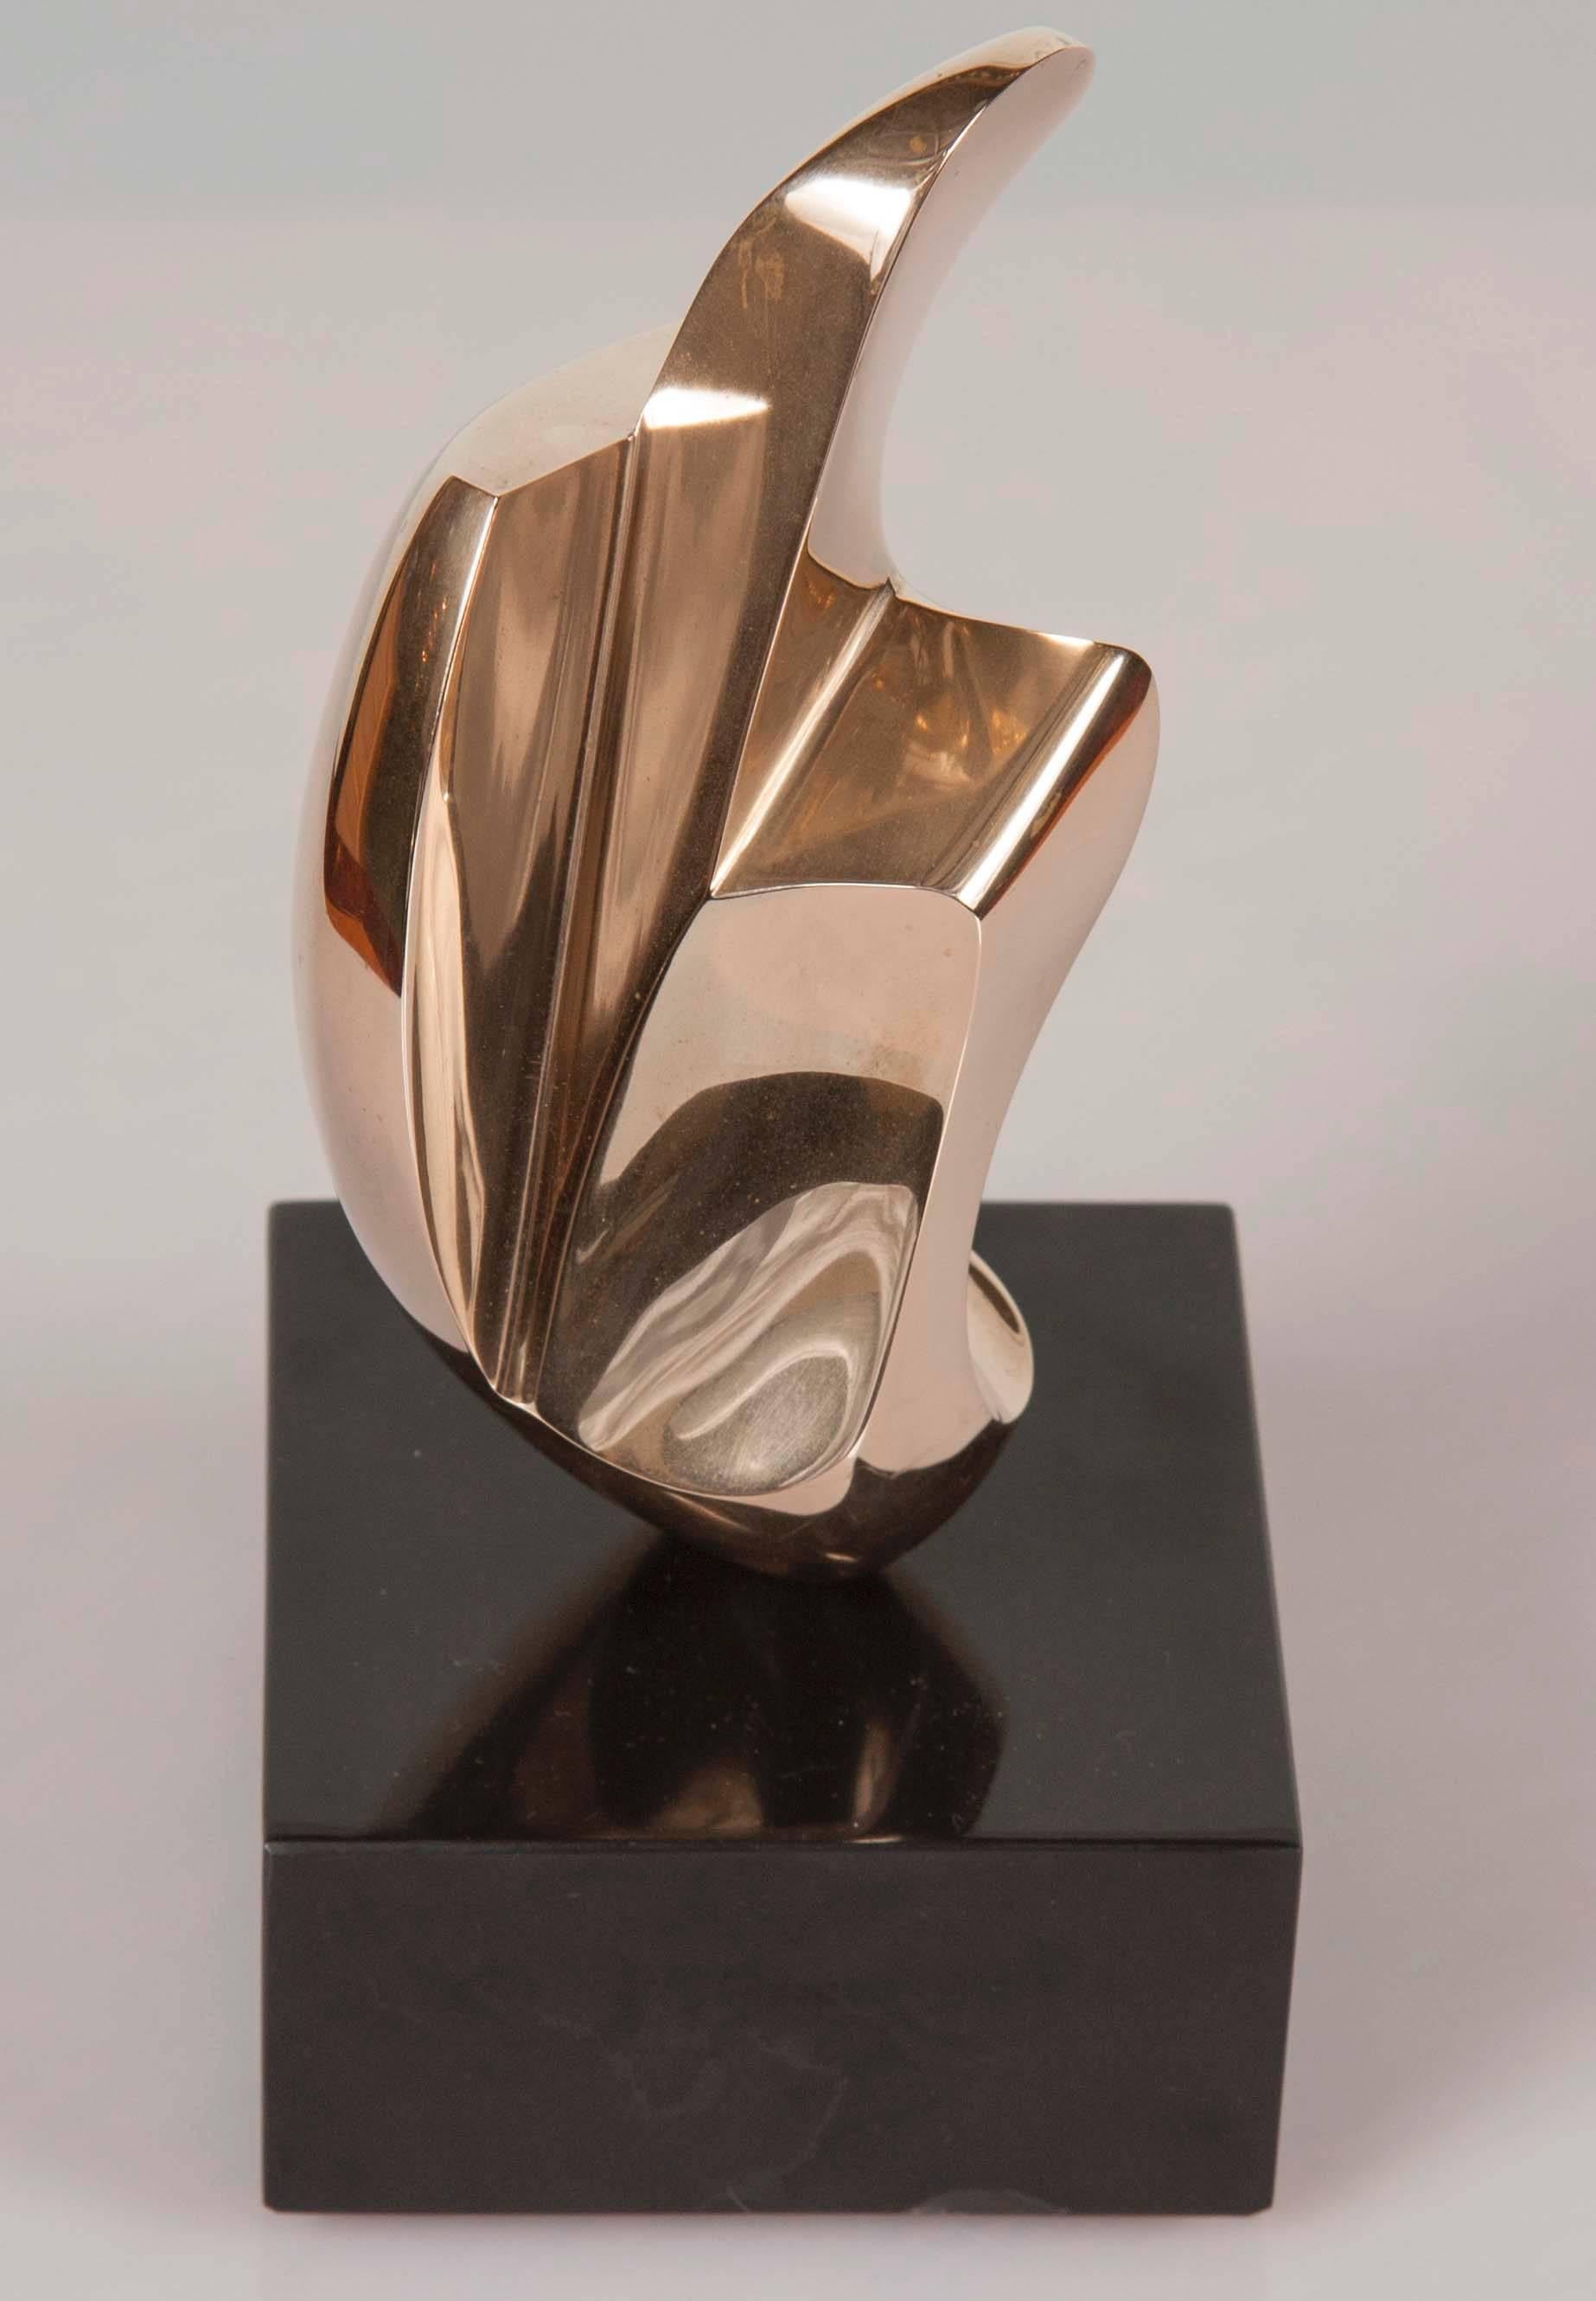 Bronze Abstract Sculpture by Antonio Grediaga Kieff, Signed and Numbered 5/9 2